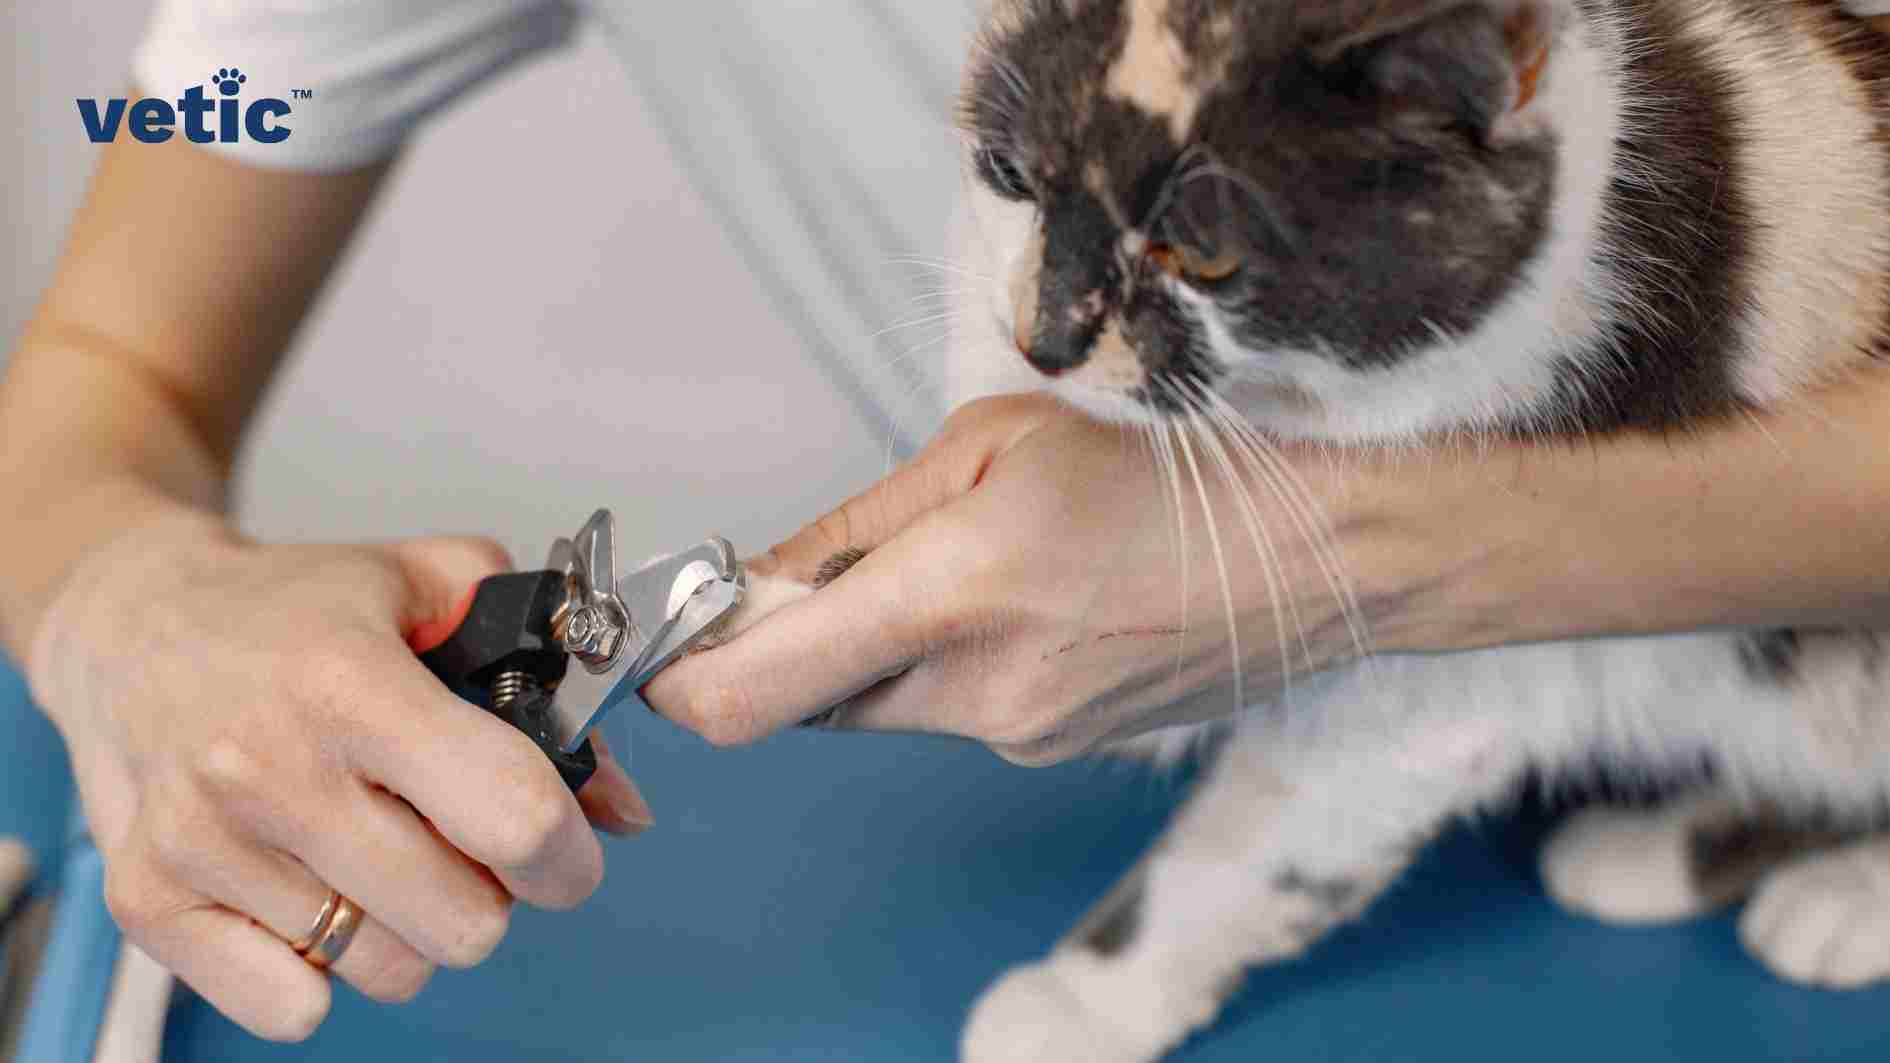 A photo of a person trimming a cat’s nails using a specialized nail clipper, an essential step in grooming and maintaining the cat’s health and comfort, aligning with the blog’s theme “Trimming Your Cat’s Nails”. The cat’s paw is gently held by the person, showcasing the process of nail trimming. The cat has white paws with some dark fur patches, typical of calico cats. Both the person and the cat are on a blue surface, possibly a grooming table or mat. In the top left corner, there is text that appears to be a logo or watermark. A person trimming the nails of a calico cat with a nail clipper A calico cat’s paw being held by a person with a nail clipper on a blue surface A nail clipper and a person’s hand near a calico cat’s paw with a logo on the corner. Trimming your cat's nails like this is entirely possible at home if you have trained them since they were kittens or if you are ready to exercise a lot of patience and do one nail at a time.